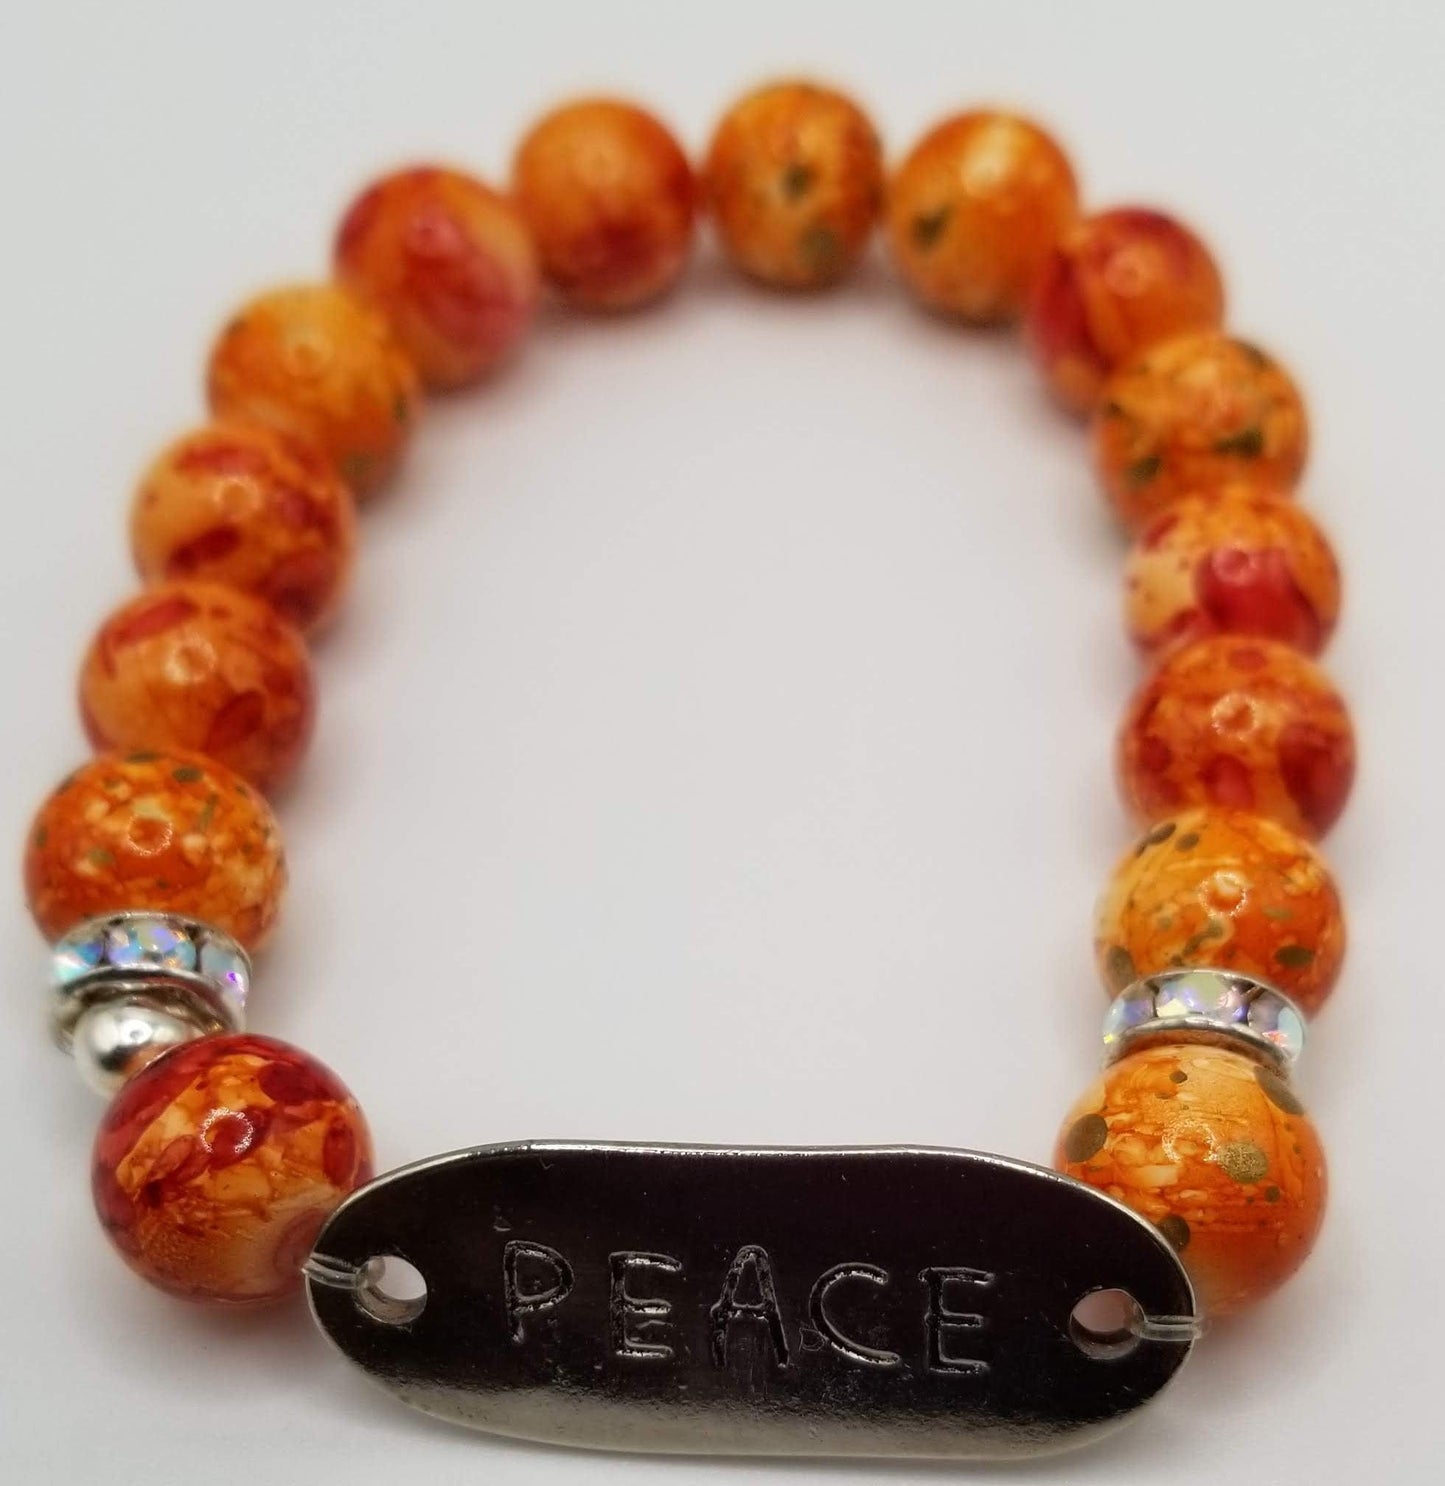 Handcrafted Jewelry By Teri C Stamped Peace